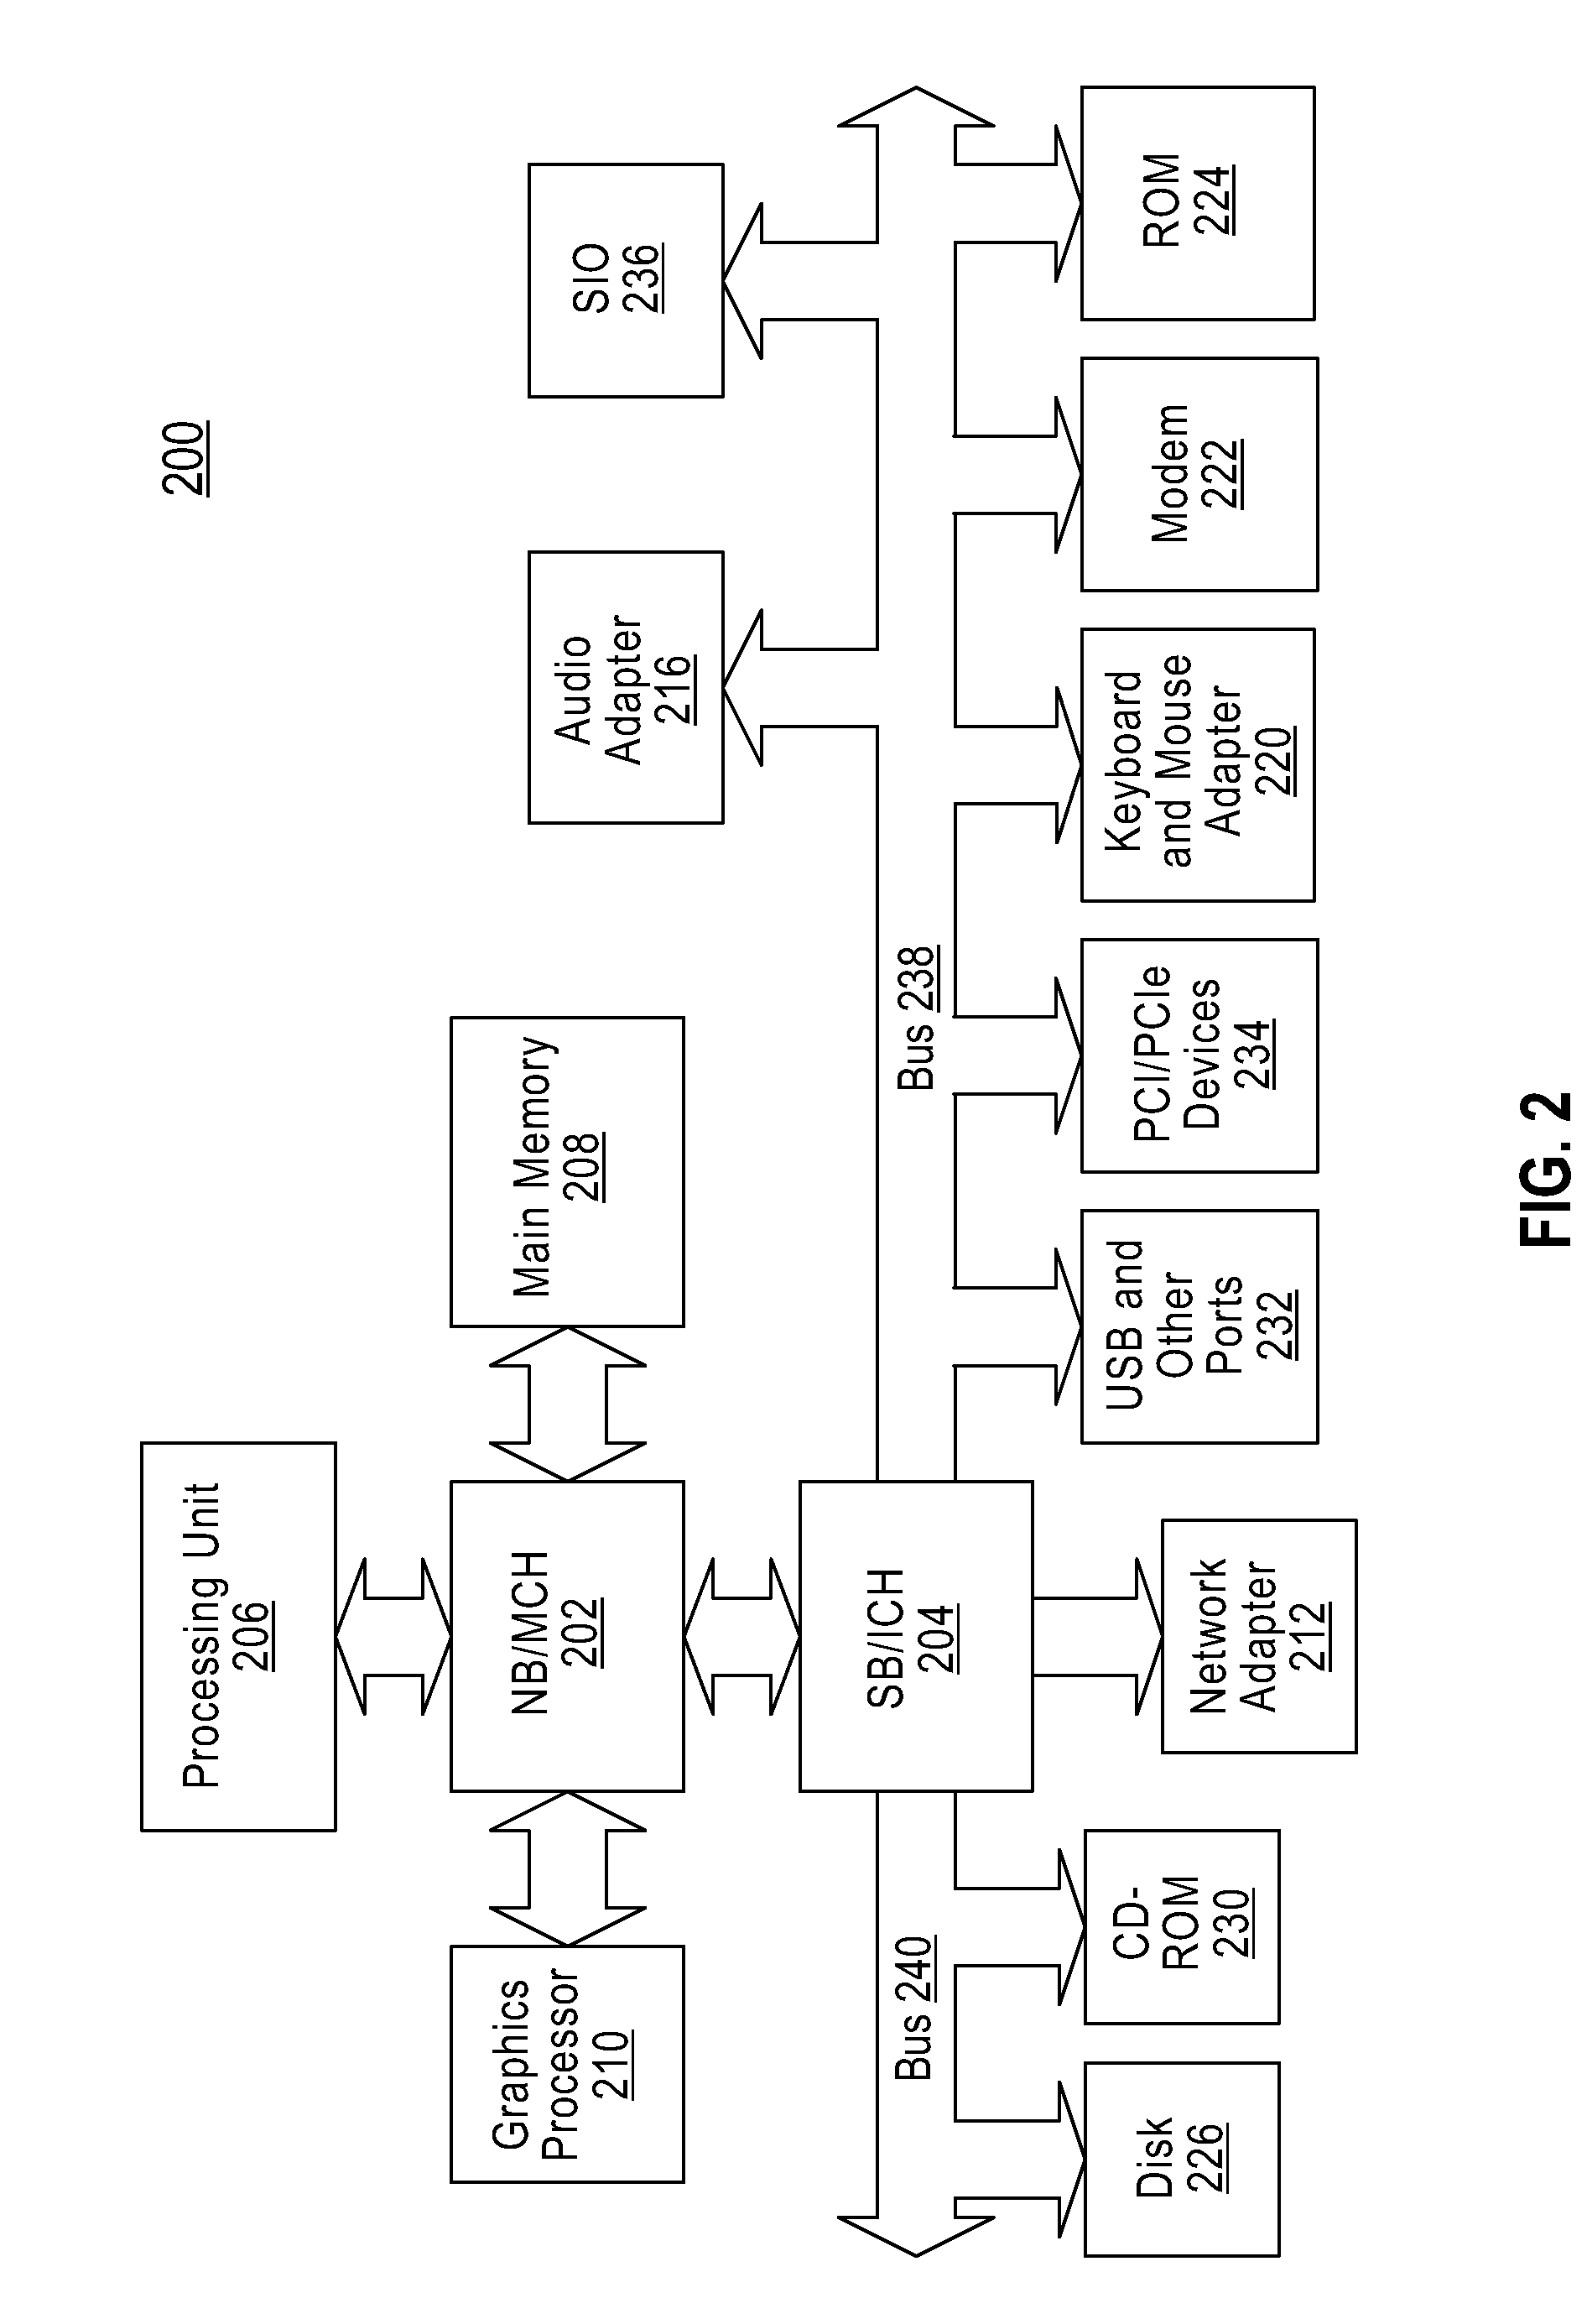 Method and apparatus for efficient problem resolution via incrementally constructed causality model based on history data